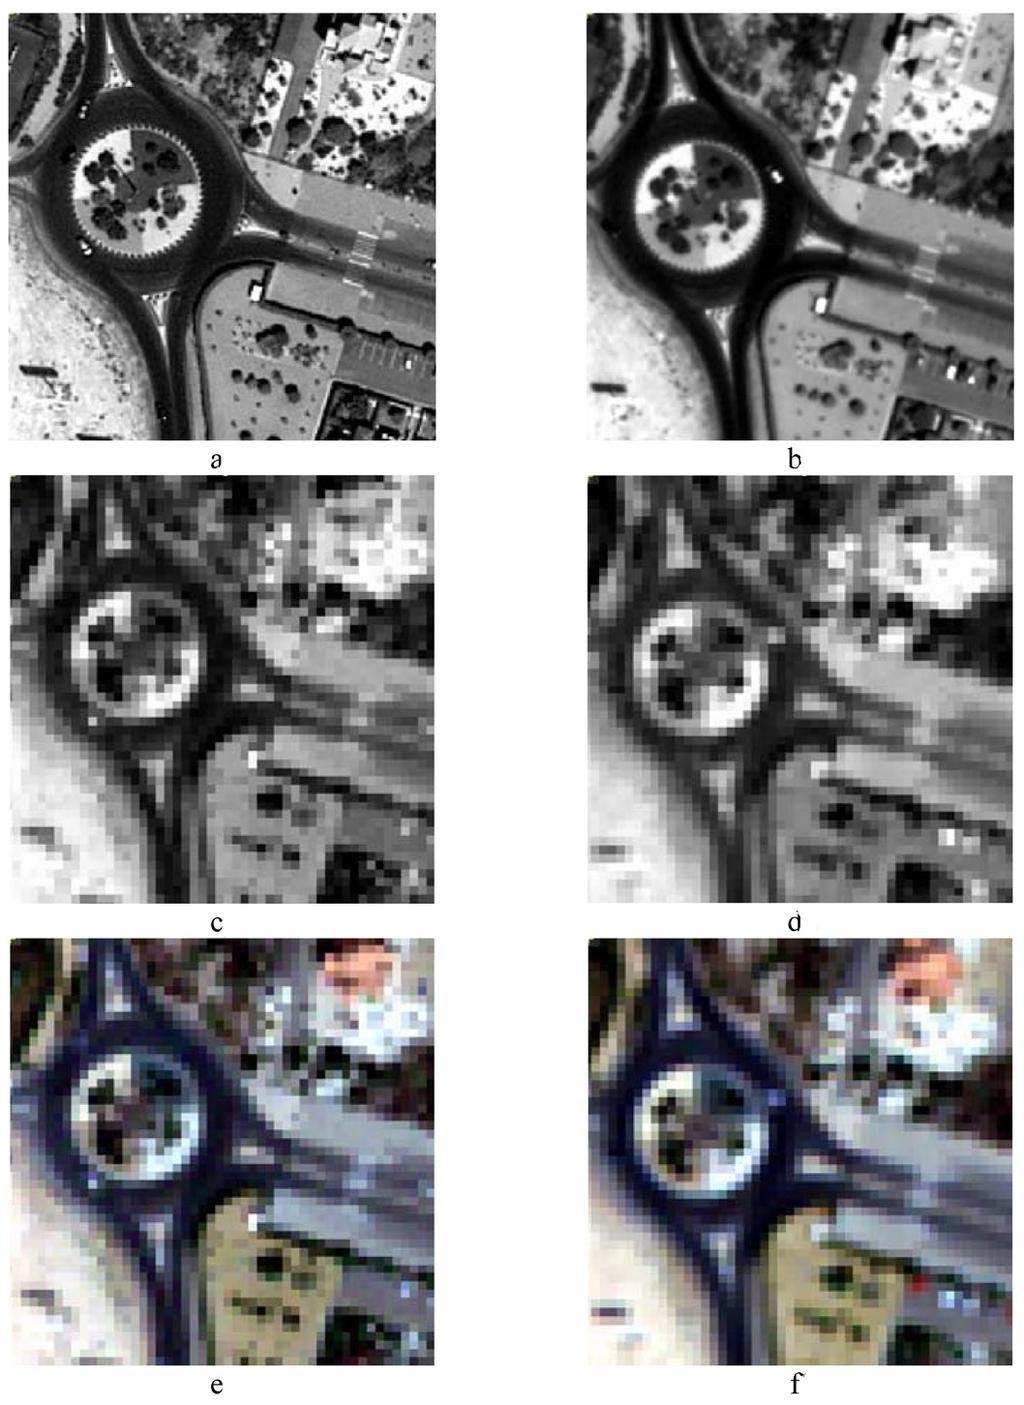 European Journal of Remote Sensing - 2014, 47: 717-738 Figure 6 - Visual quality analysis over a limited area (100 m x 100 m): (a) GE12 PAN image, (b) WV24 PAN image, (c) GE12 MS Blue image, (d) WV24